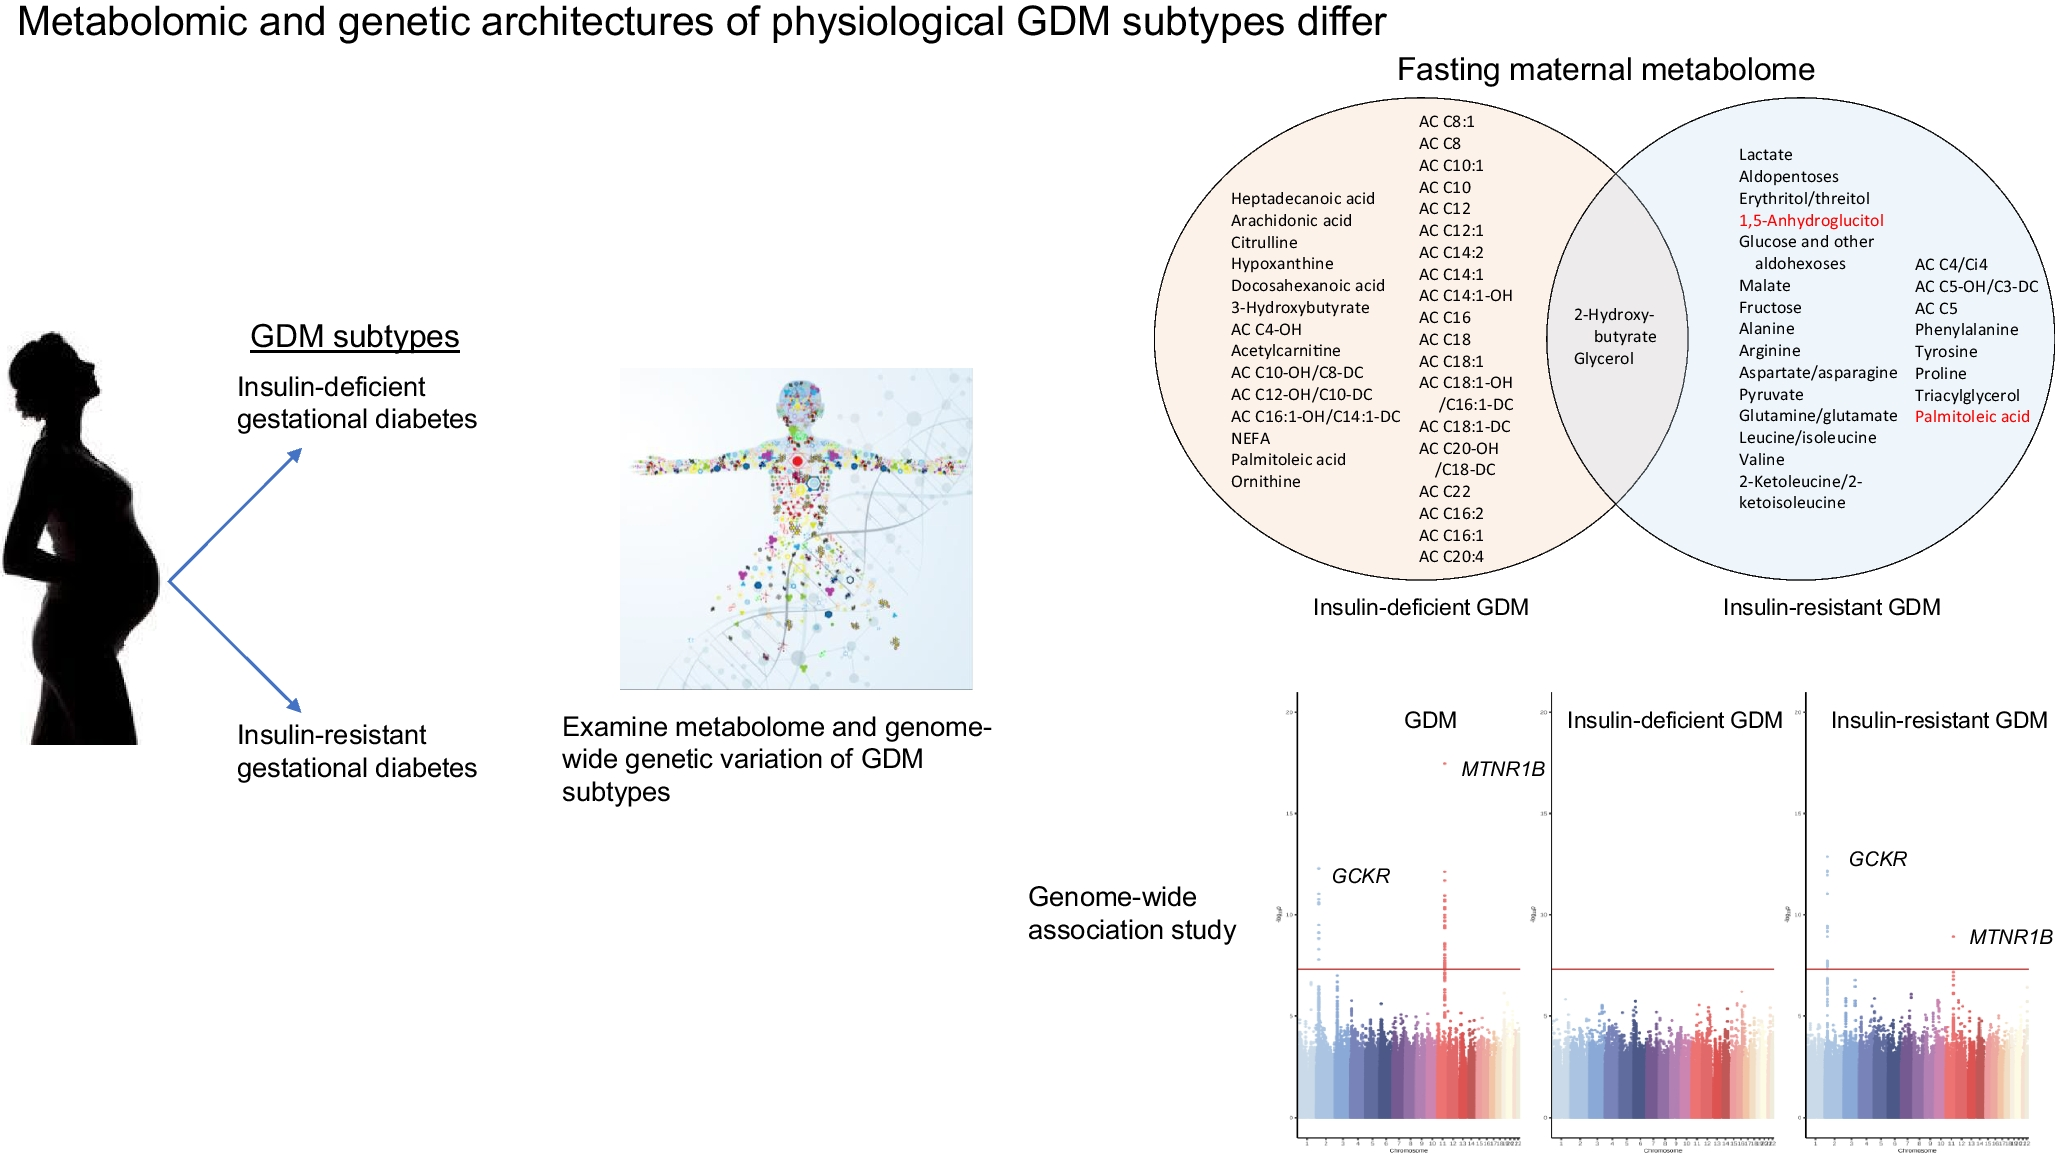 Metabolomic and genetic architecture of gestational diabetes subtypes